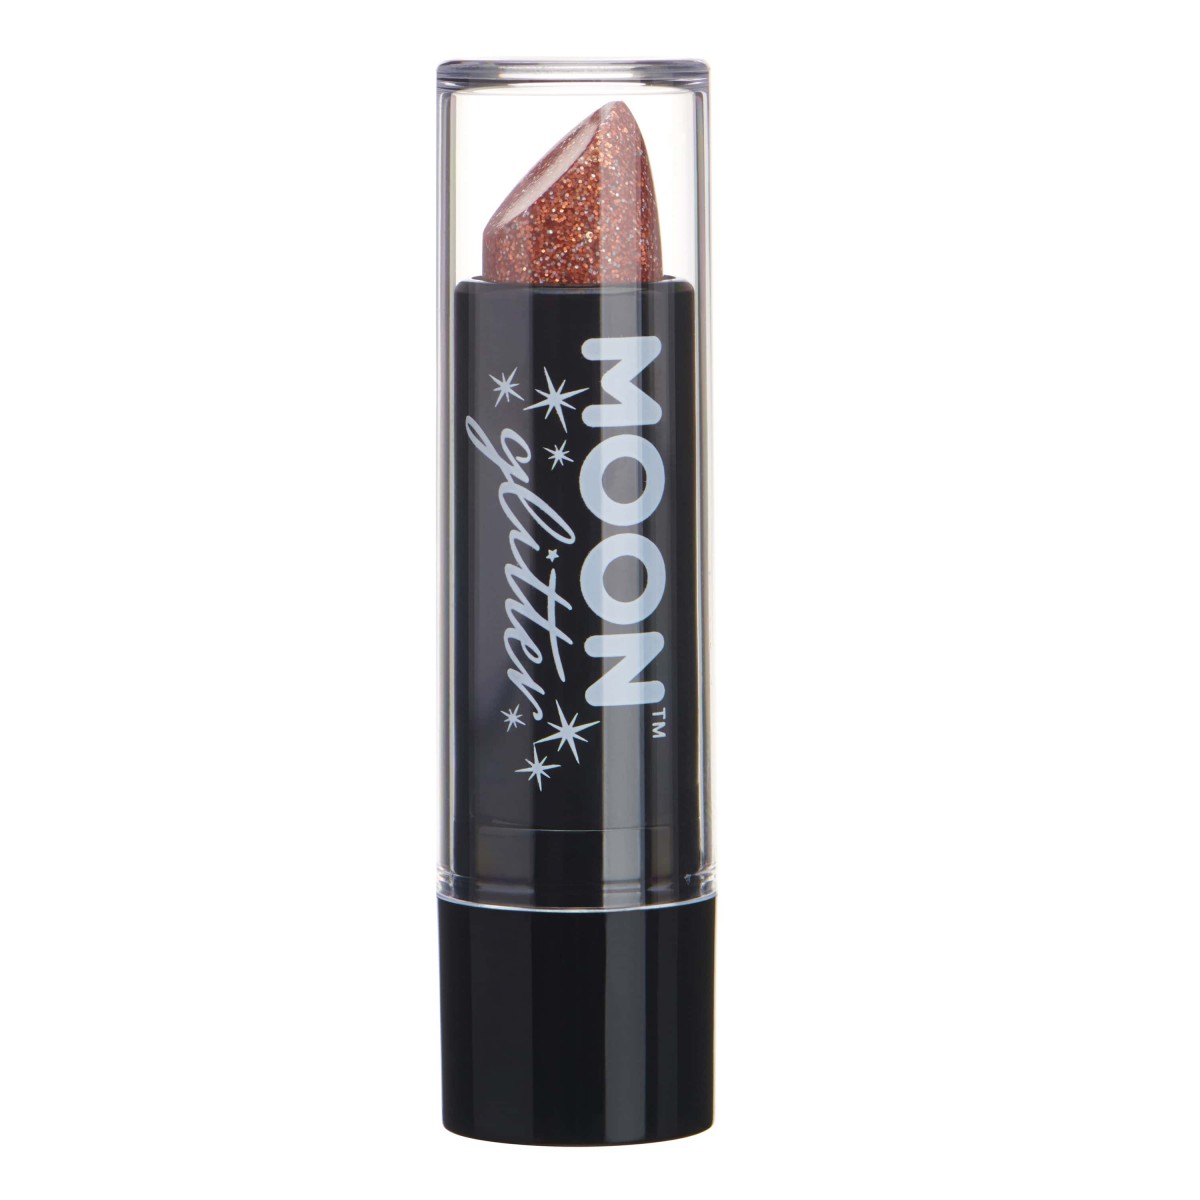 MOON CREATIONS G15 HOLOGRAPHIC GLITTER LIPSTICK ROSE GOLD 4.2g